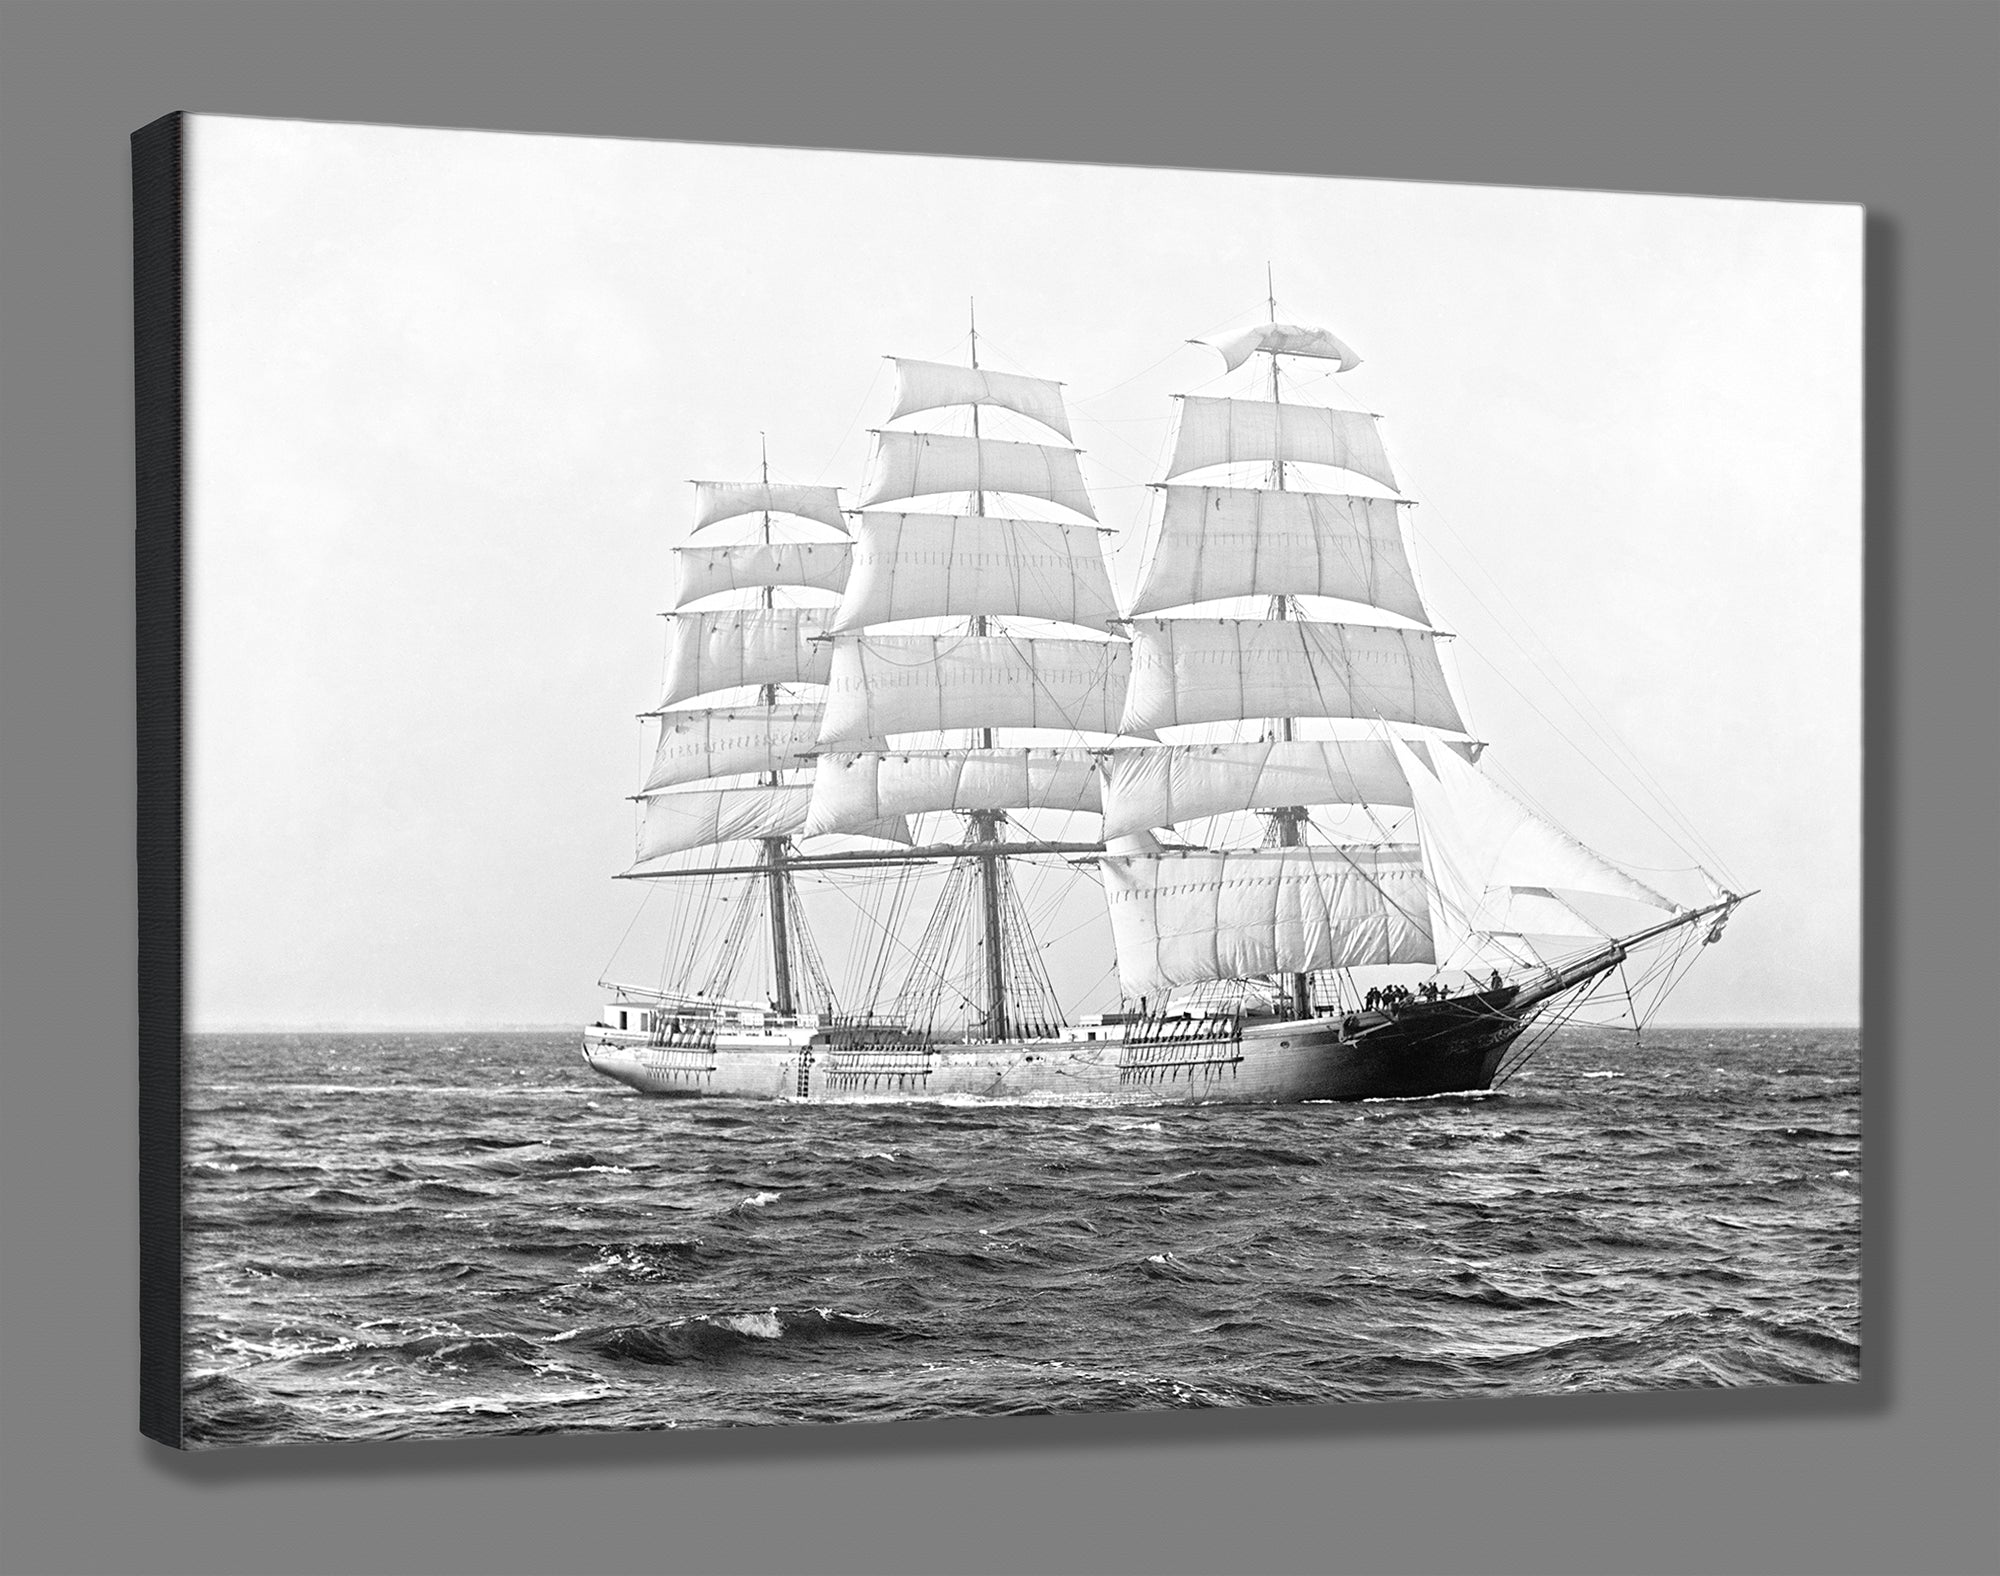 A canvas reproduction of a vintage photograph of the Clipper Ship St. David